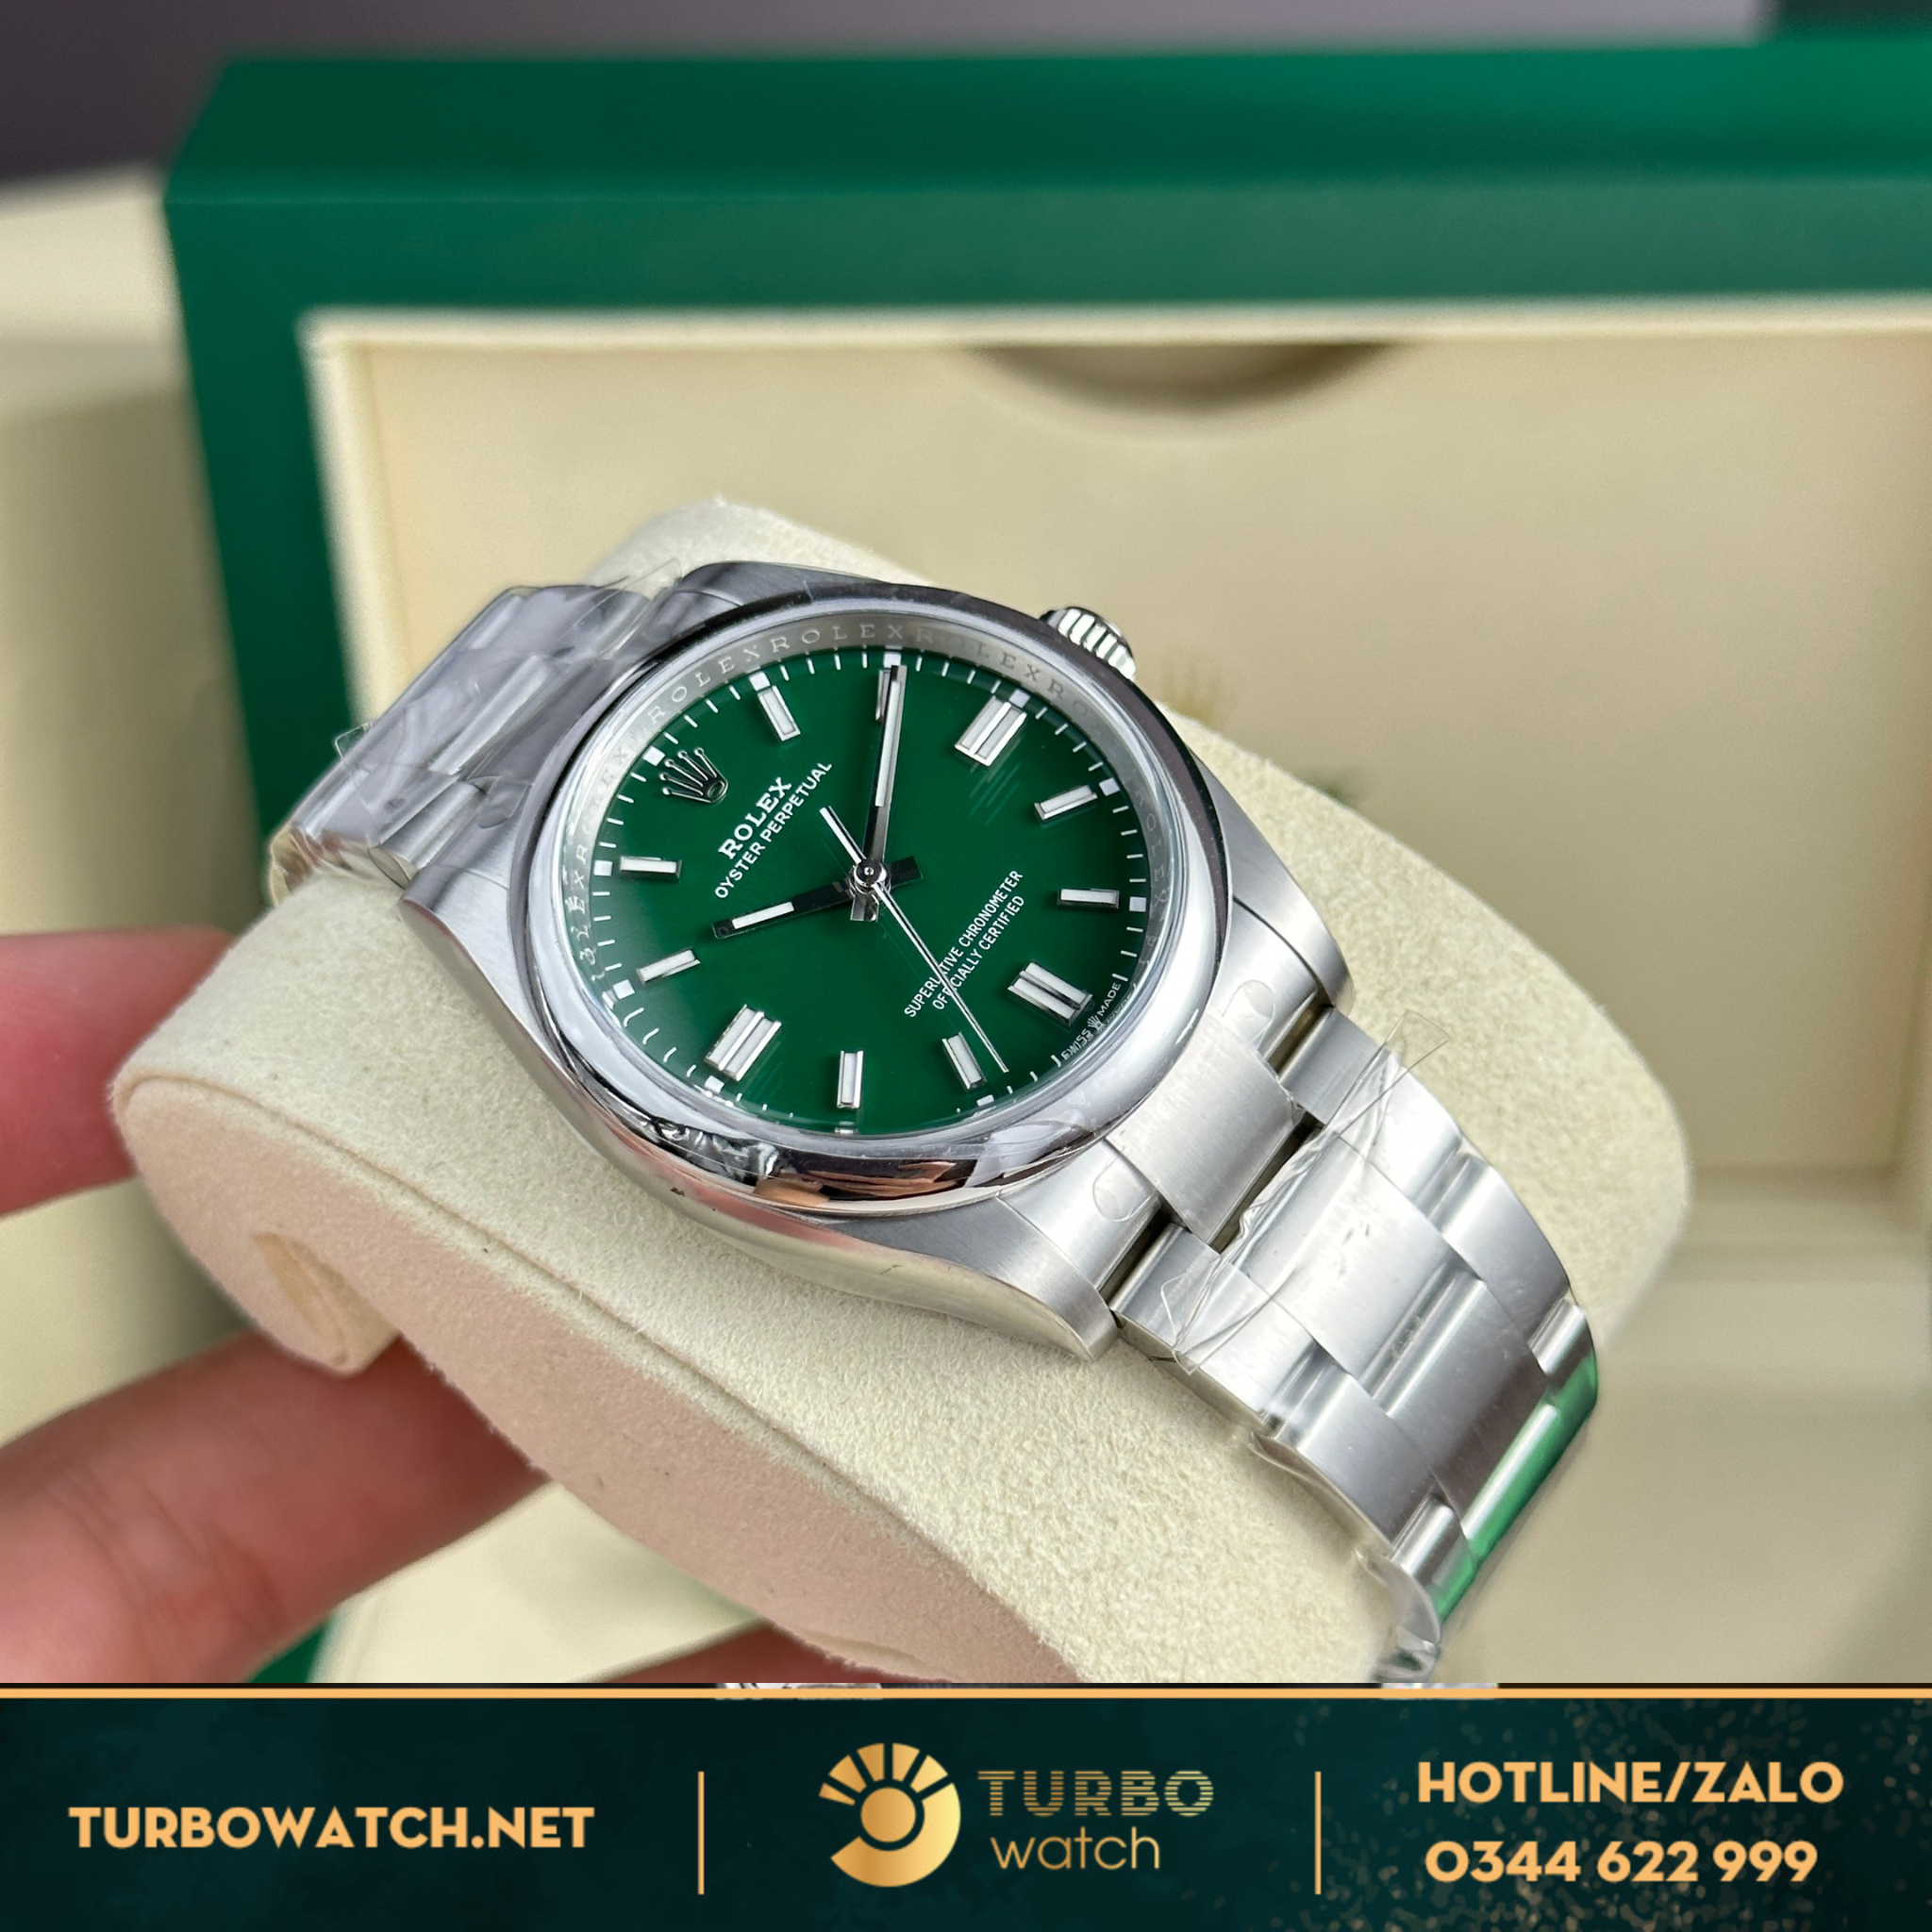 Đồng hồ Rolex Oyster Perpetual 126000 36mm green dial replica